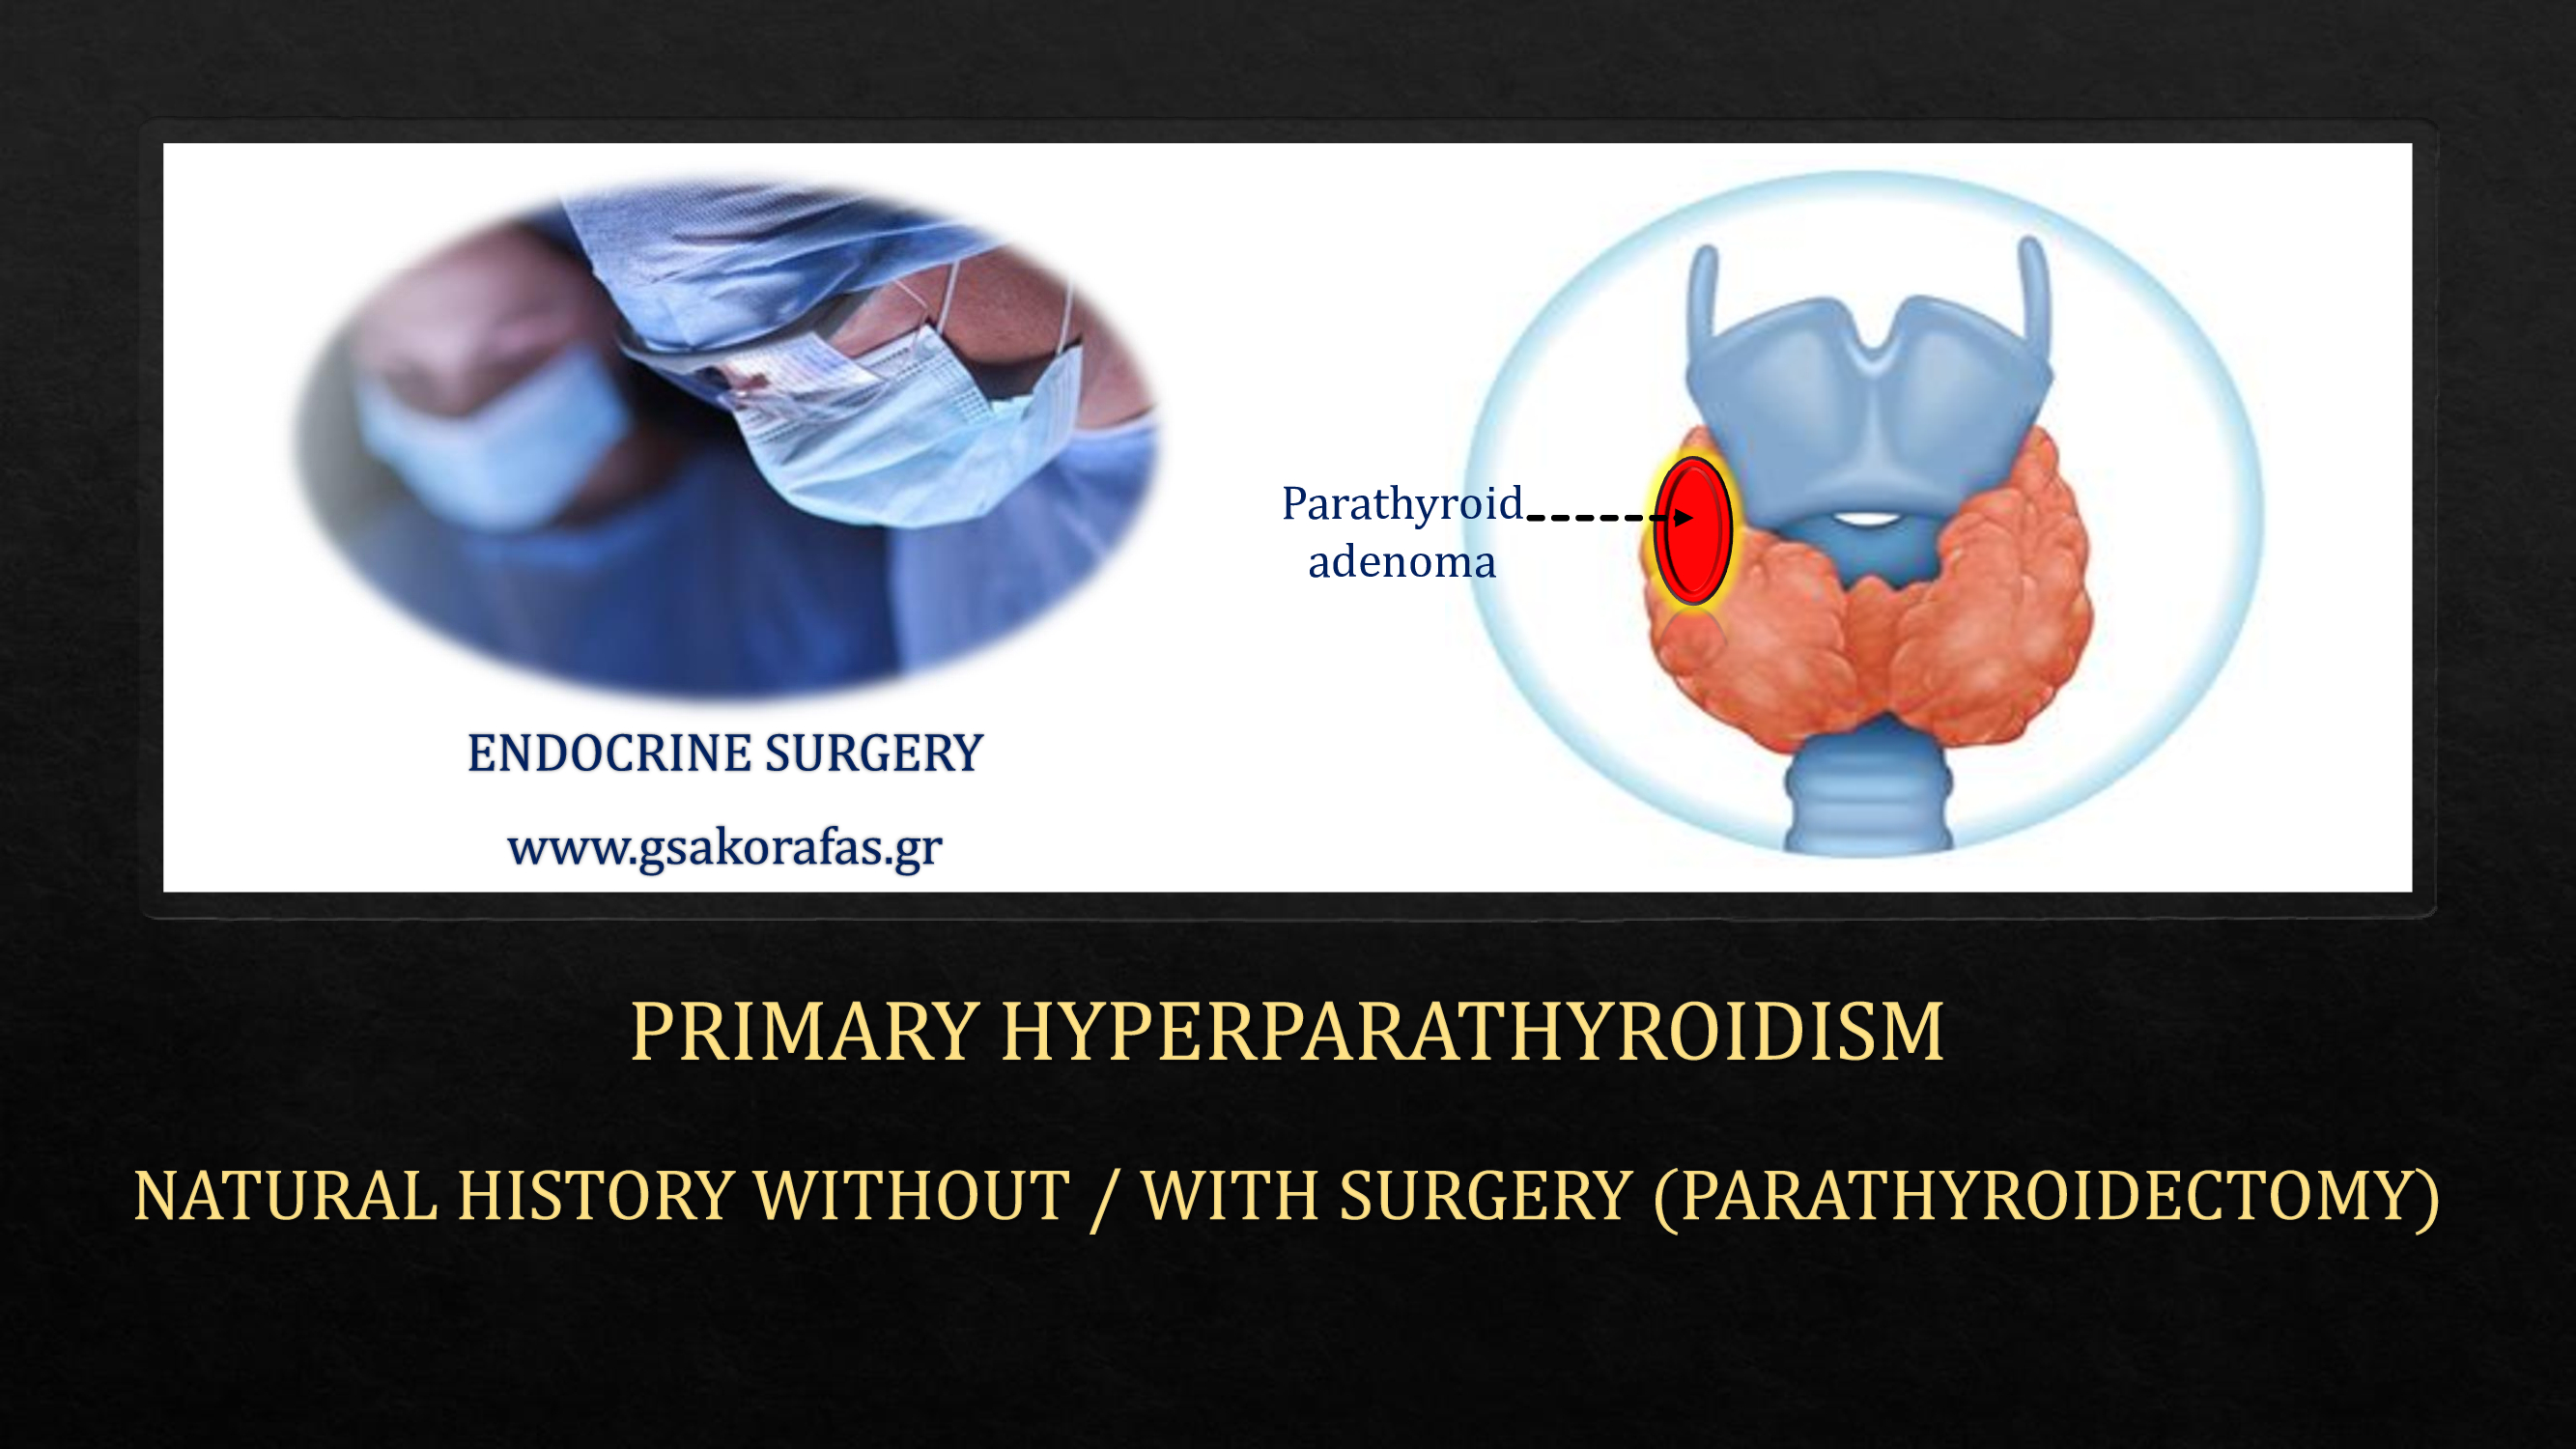 Primary hyperparathyroidism – natural history with and without surgery (parathyroidectomy)